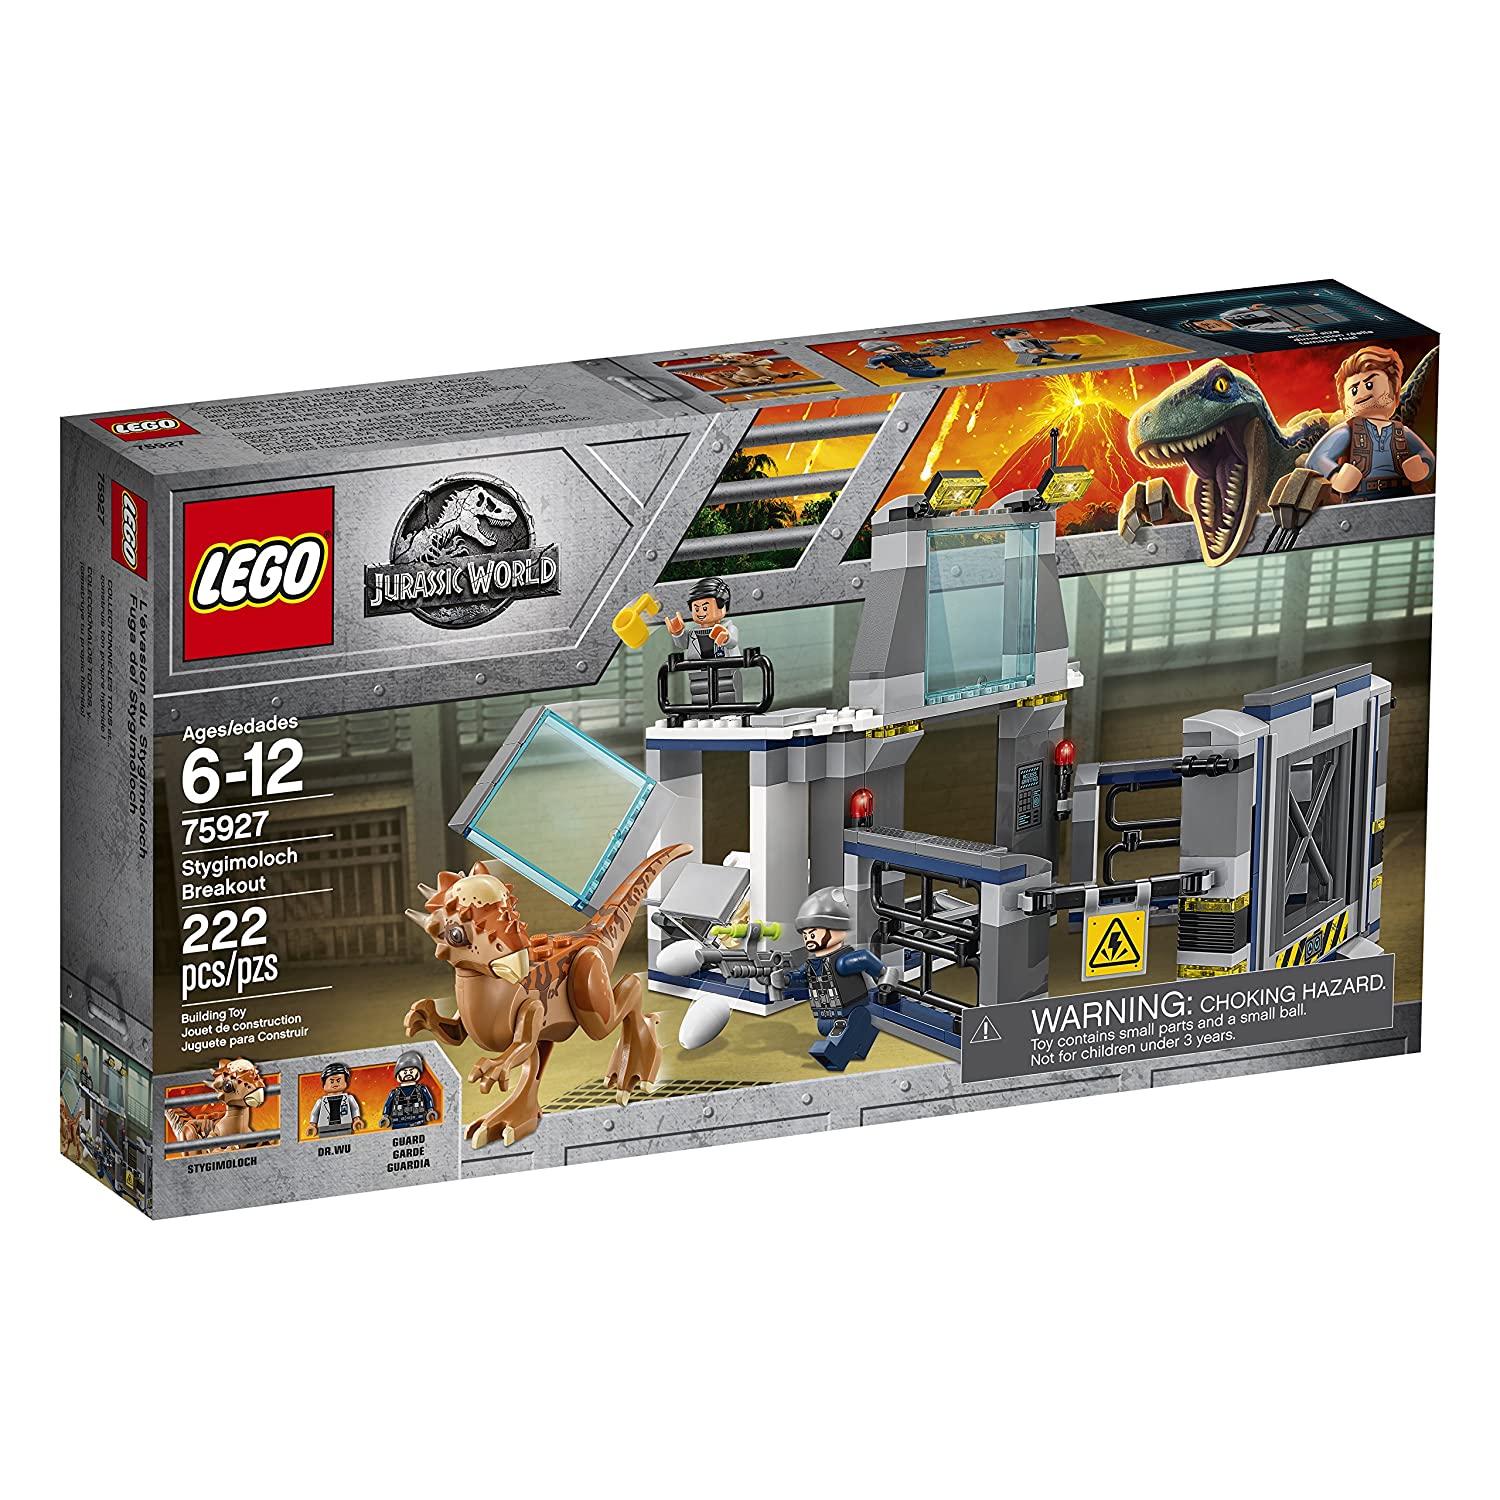 Top 9 Best Lego Jurassic Park Sets Reviews in 2023 9